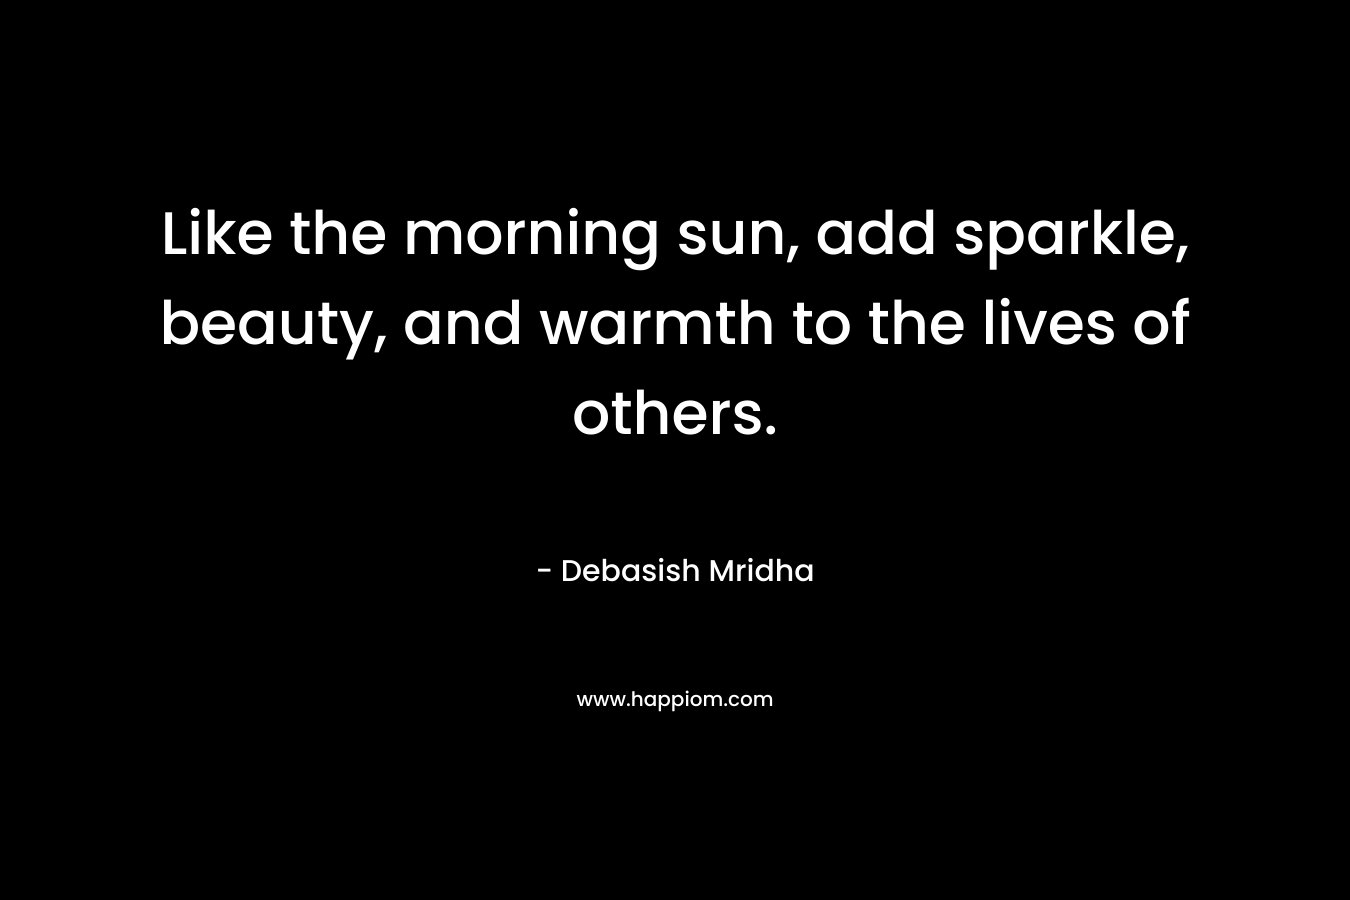 Like the morning sun, add sparkle, beauty, and warmth to the lives of others.